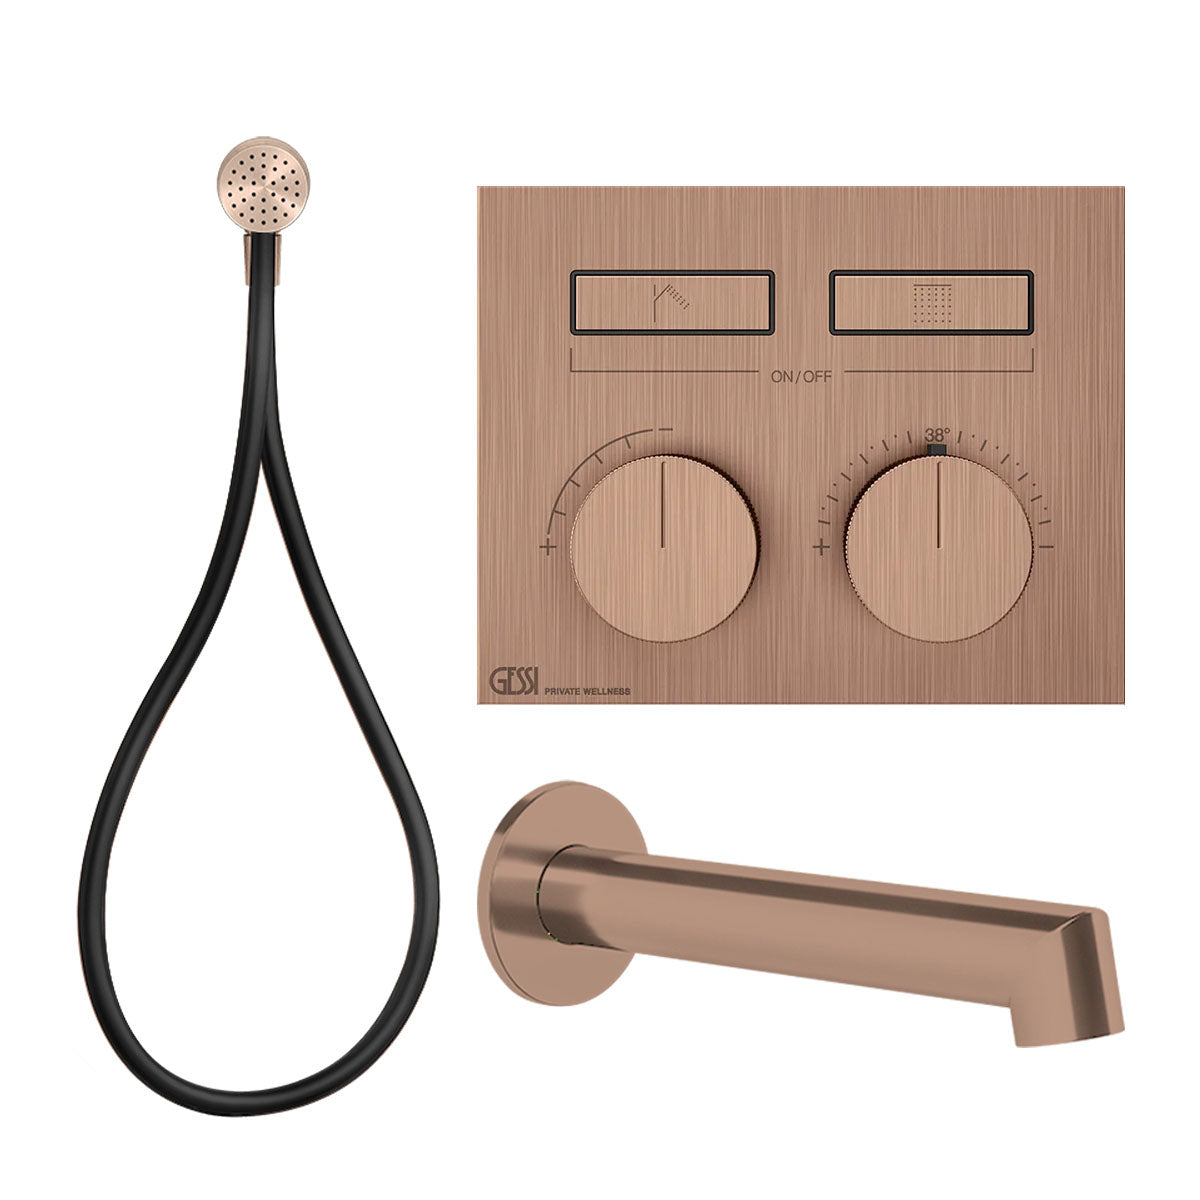 Gessi HiFi 2 Outlet Thermostatic Shower Valve with Magnetic Shower Handset and Bath Spout COPPER